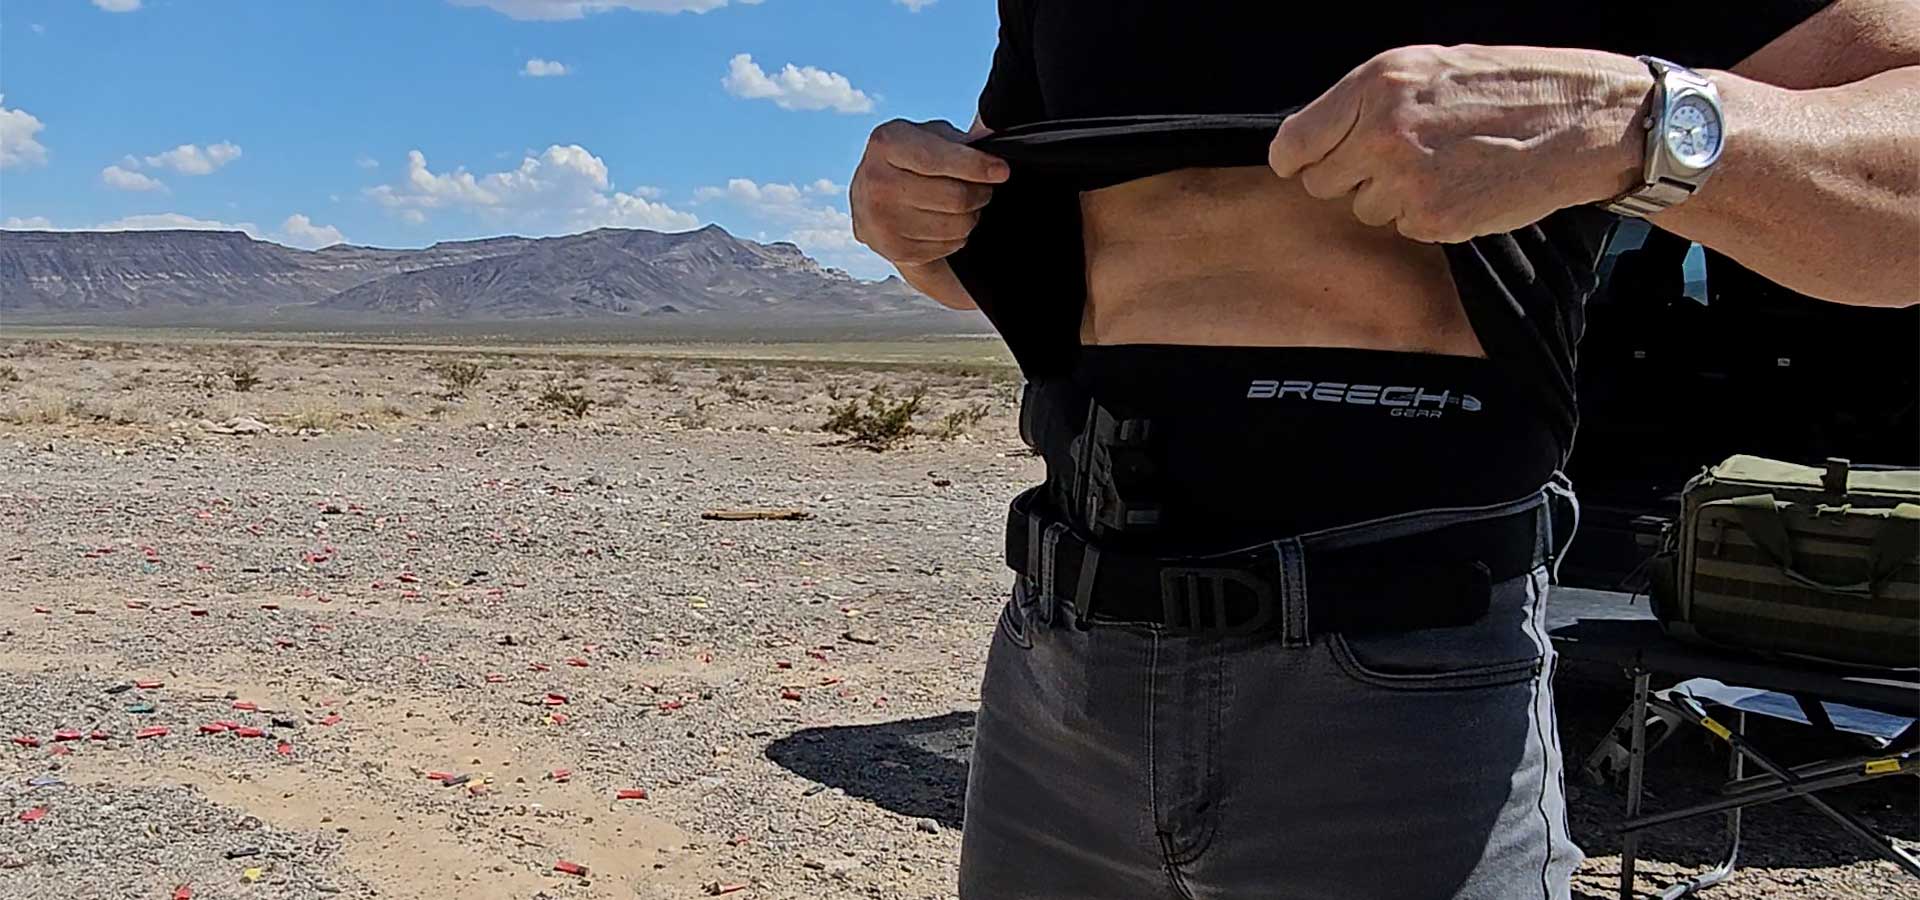 Wearing Breech Gear's conceal carry underwear in Stealth Black out in the desert.